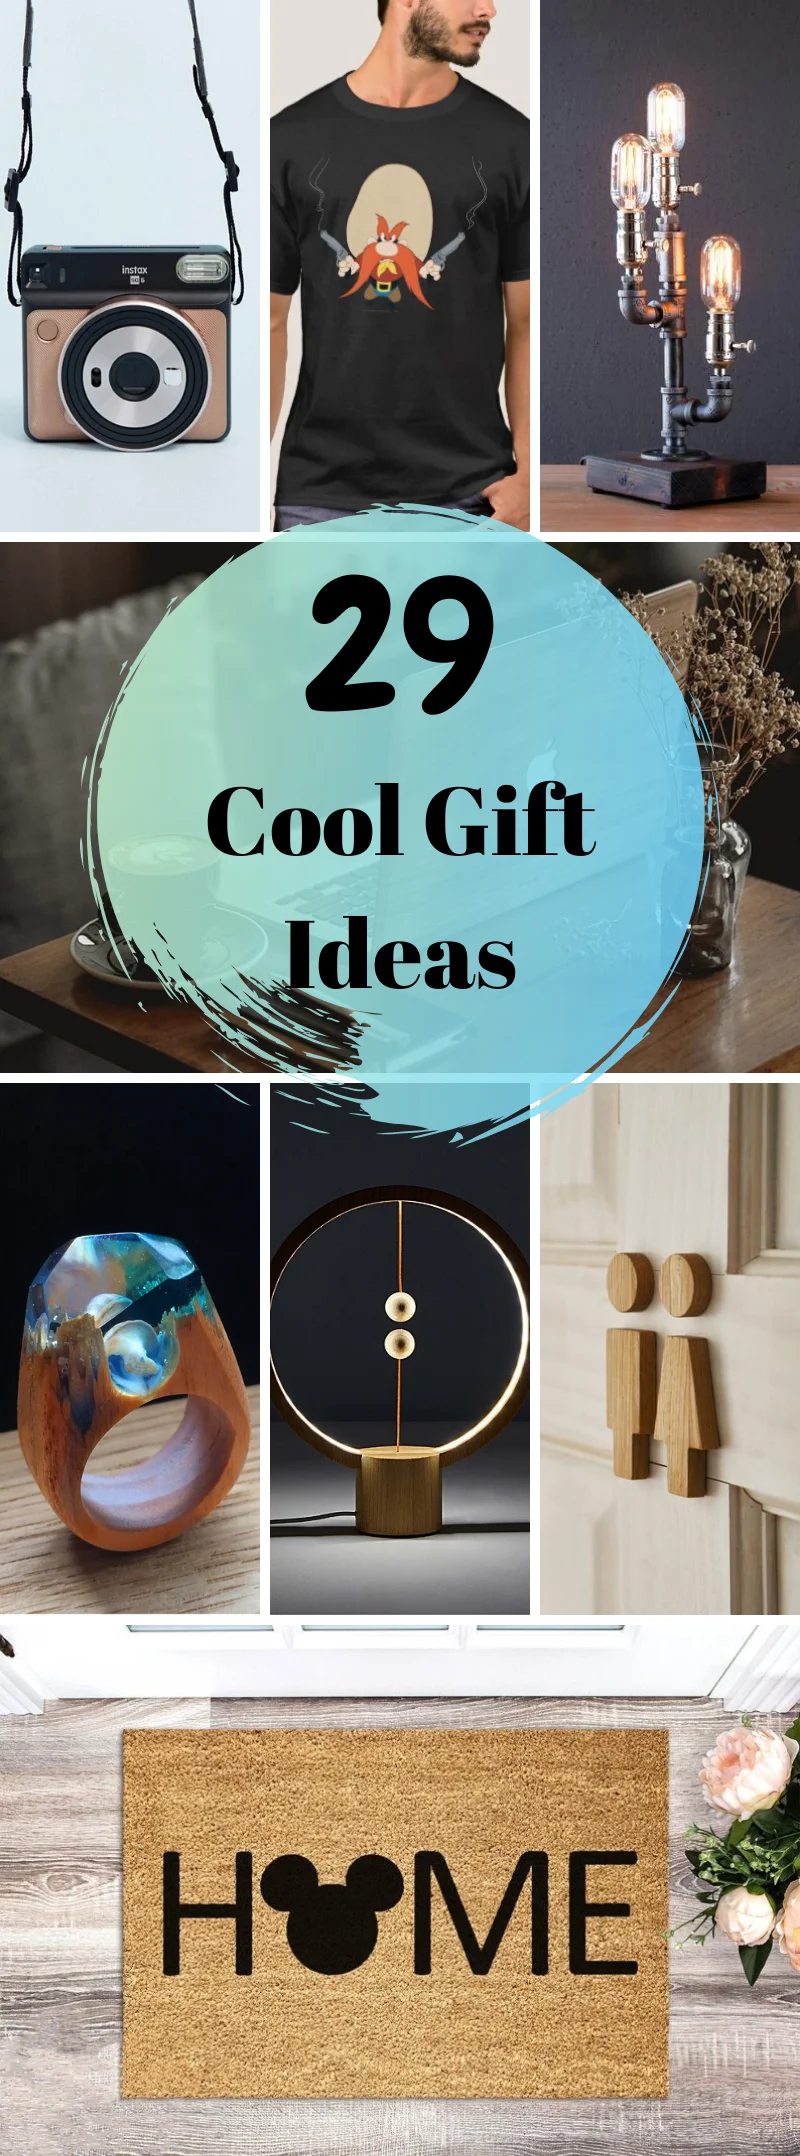 Cool Gift Ideas